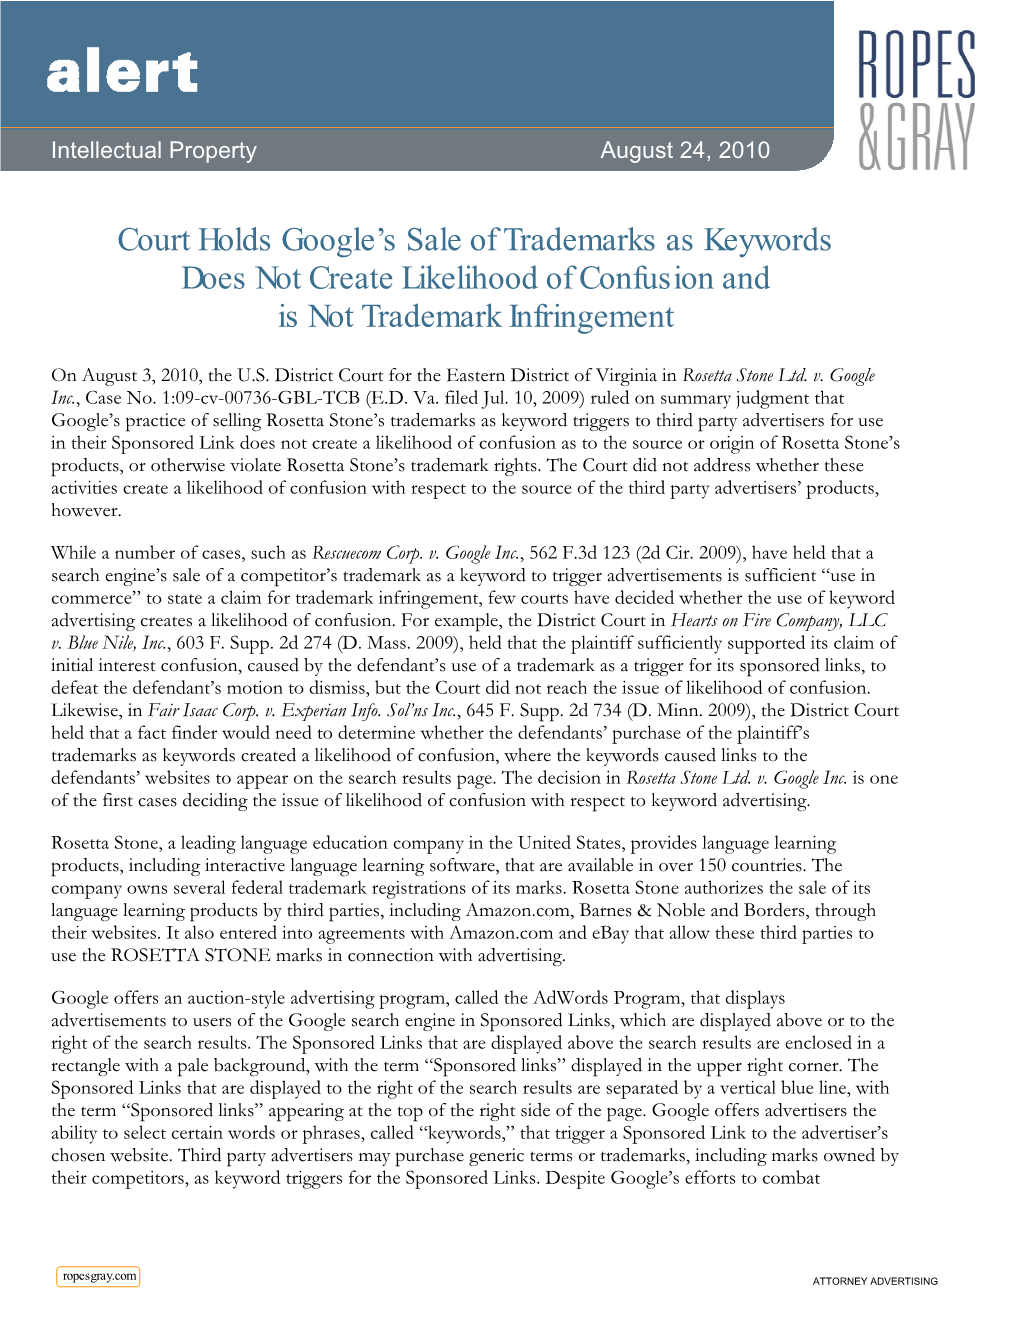 Court Holds Google's Sale of Trademarks As Keywords Does Not